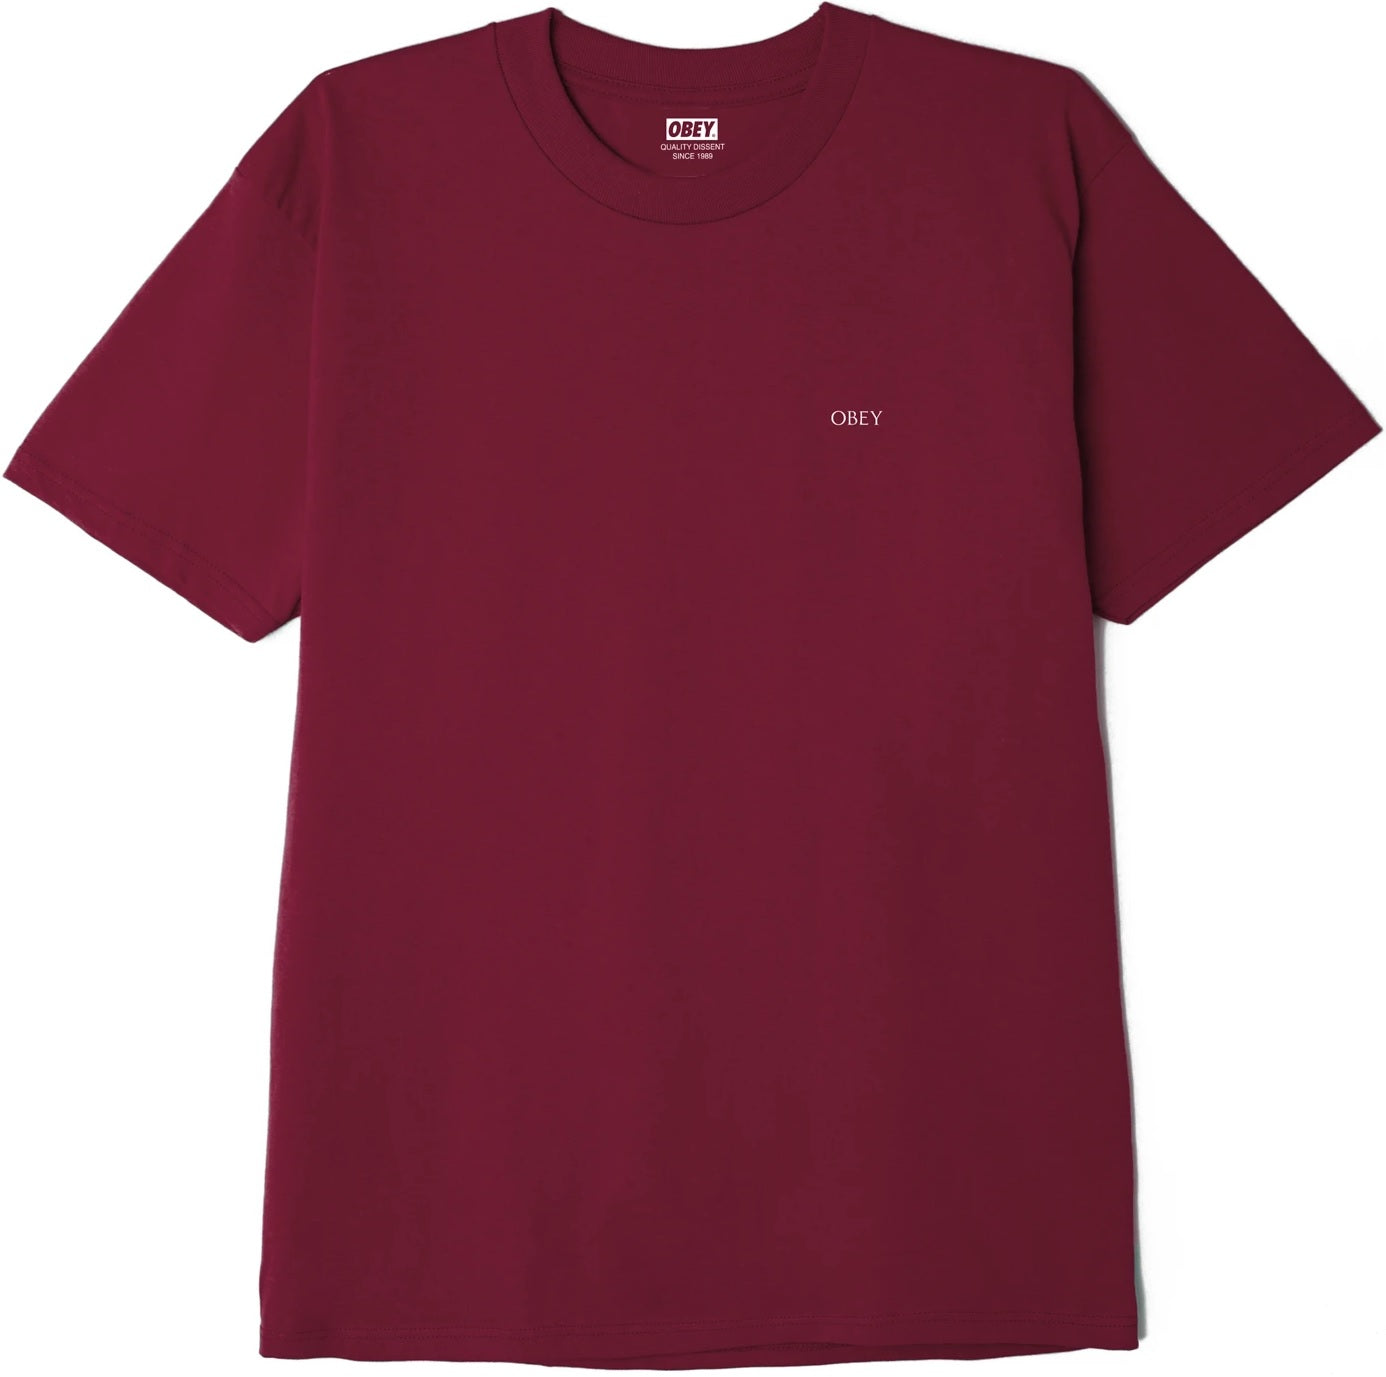 OBEY Universal Person Tee, Burgundy